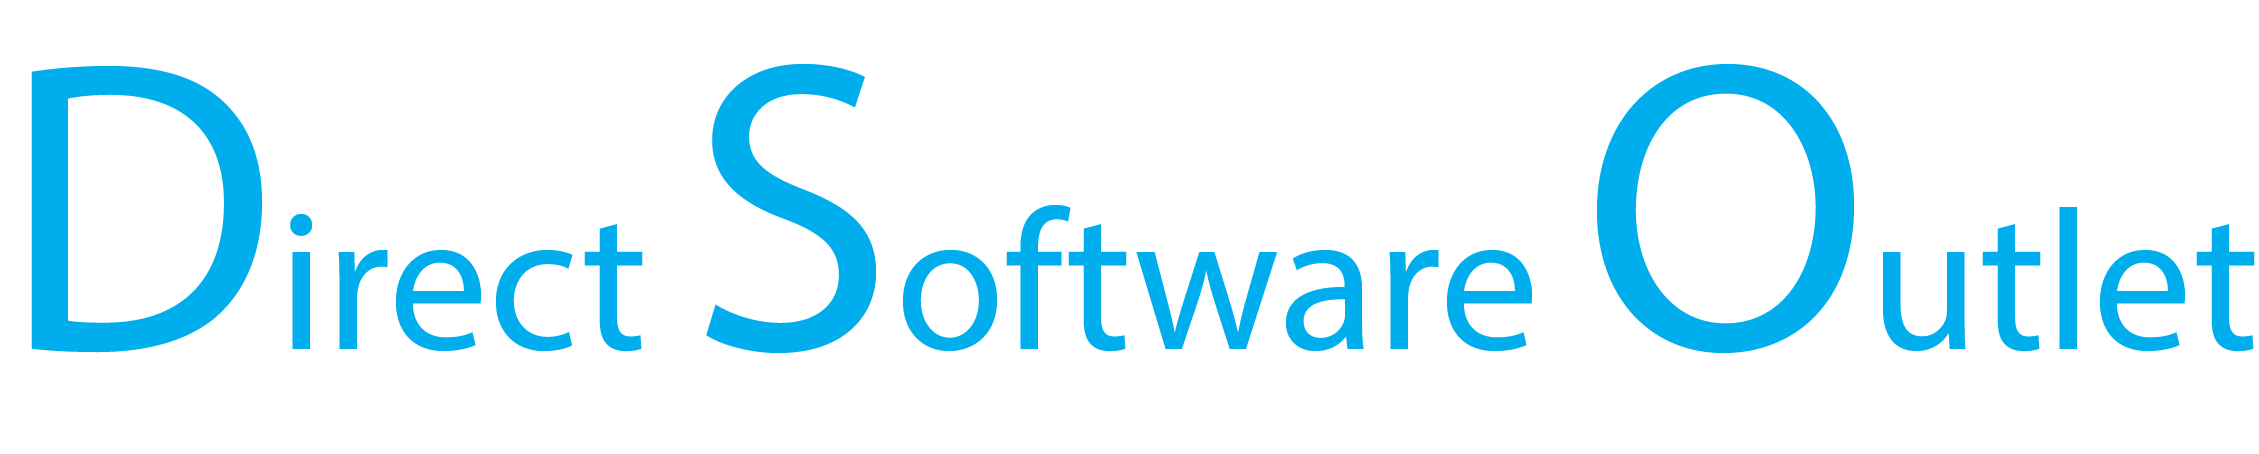 Direct Software Outlet